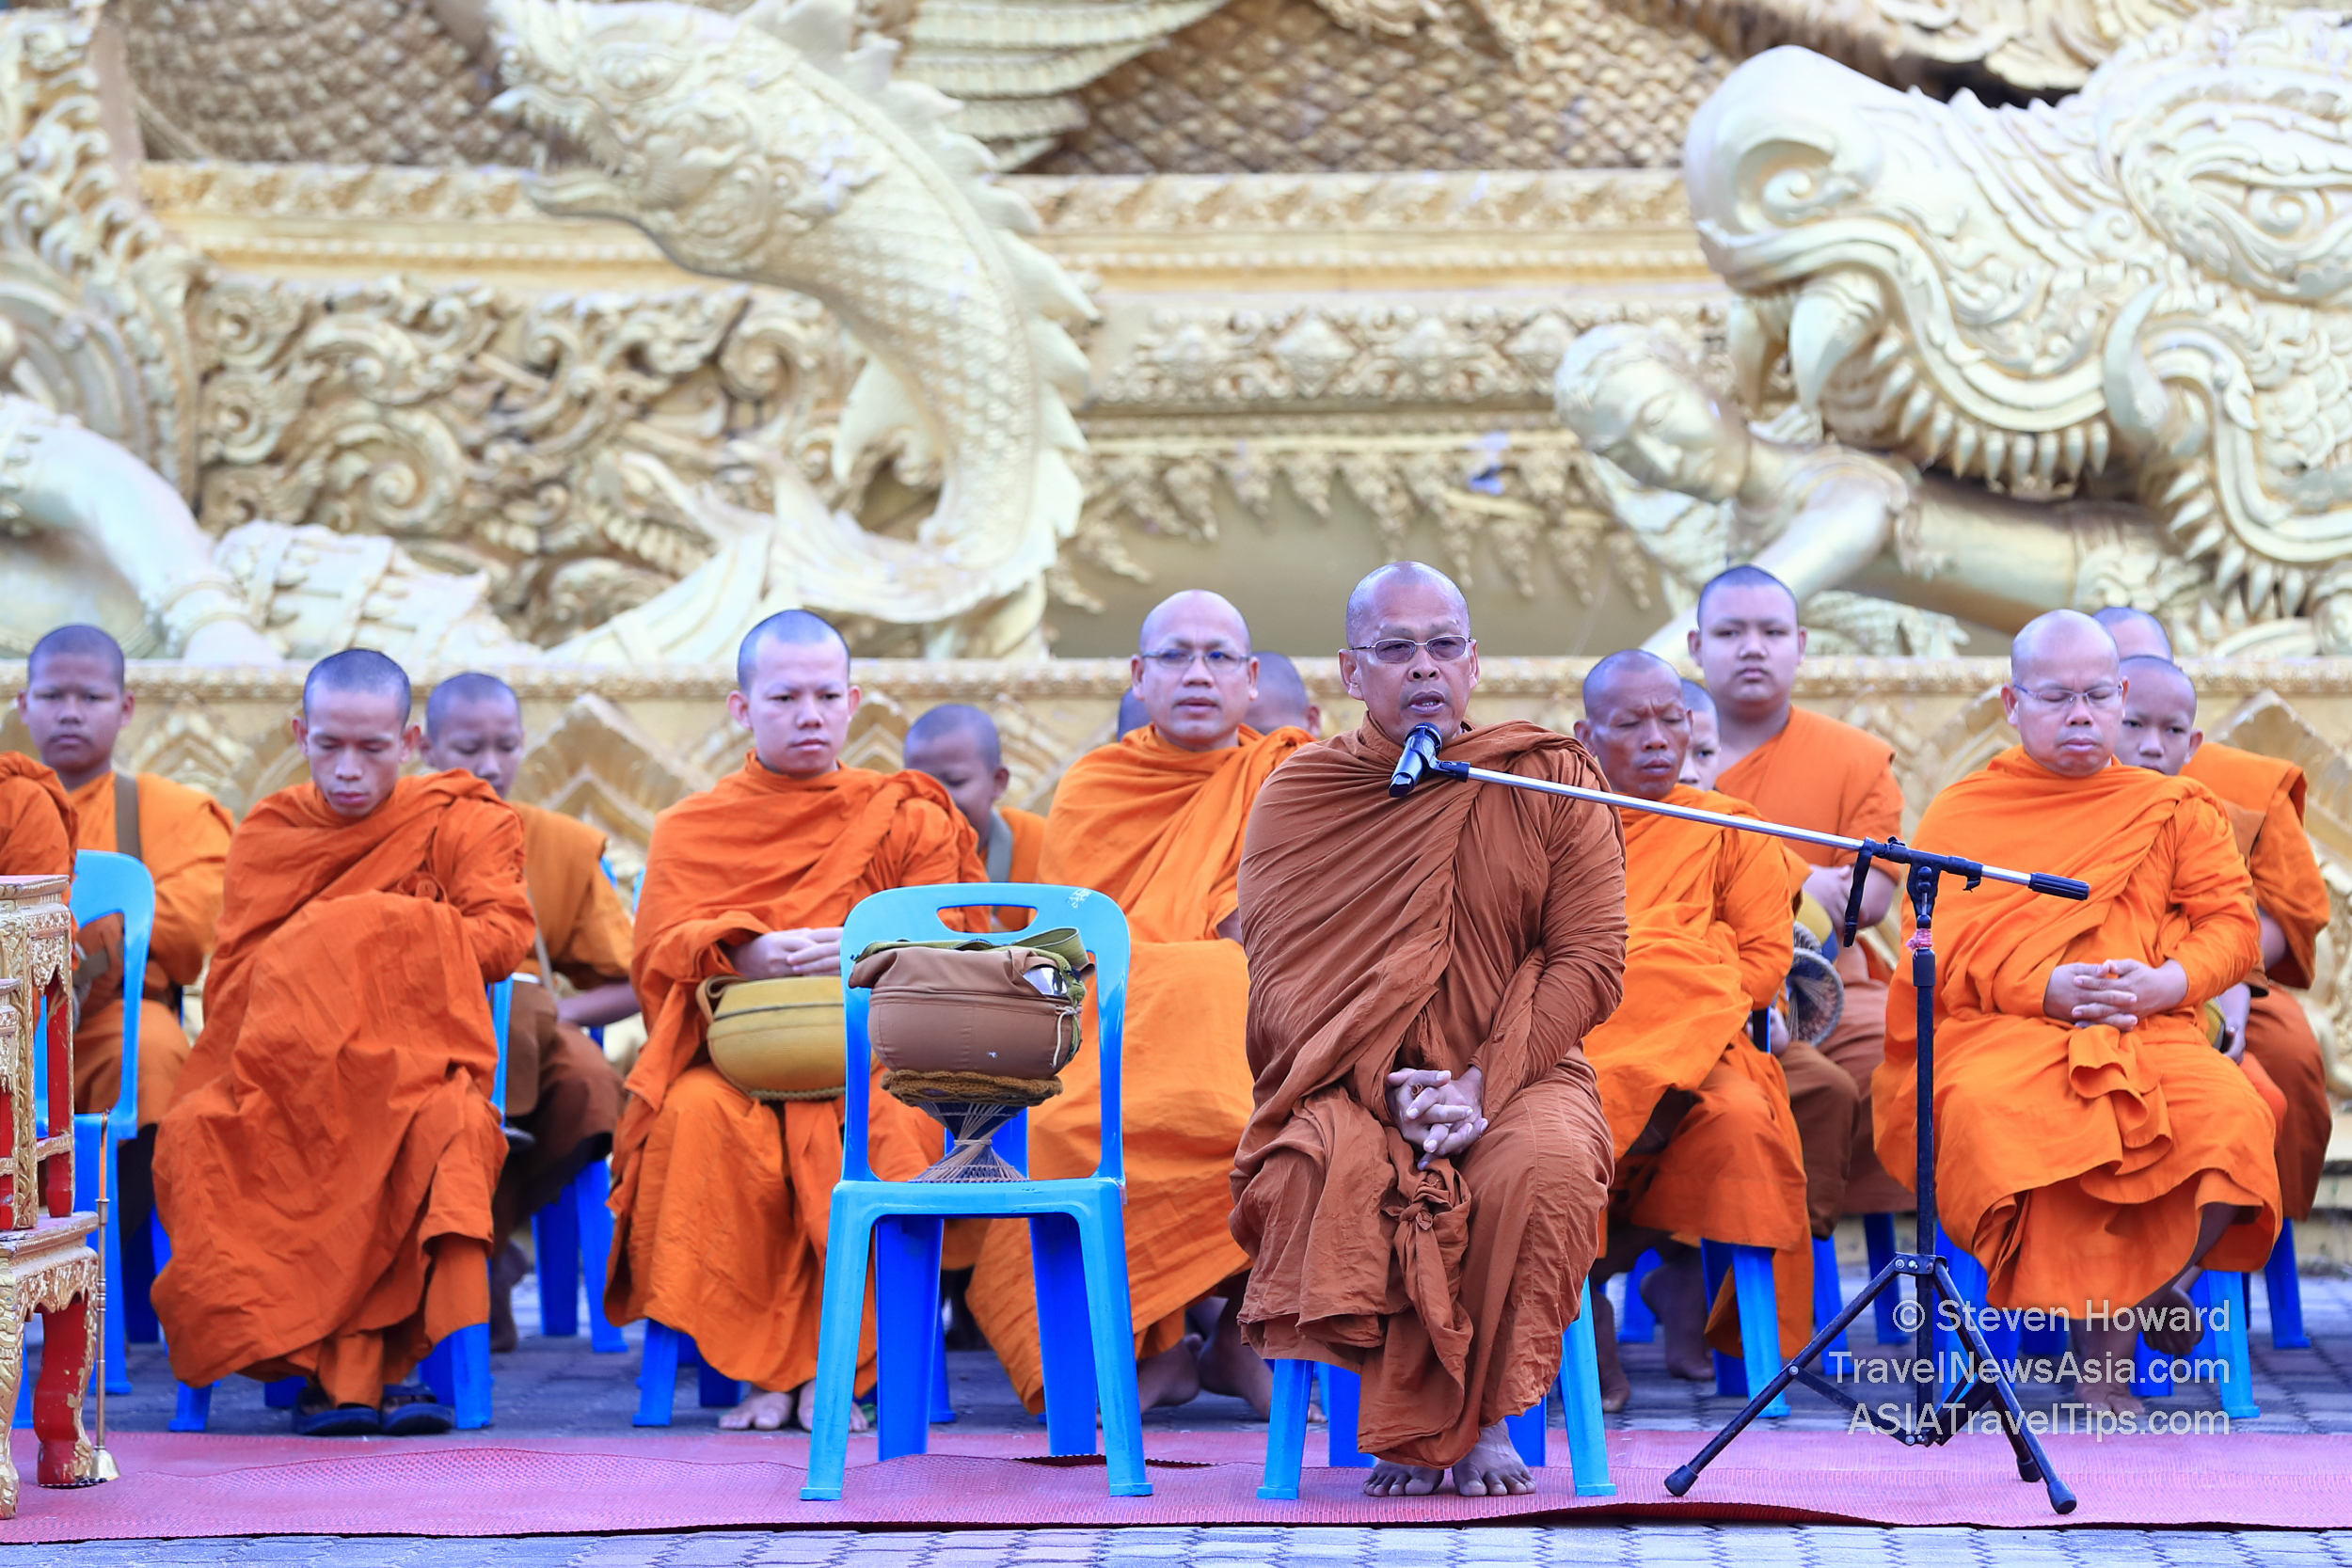 A monk performs an alms ceremony in Ubon Ratchathani's beautiful Thung Si Mueang Park in 2018. Picture by Steven Howard of TravelNewsAsia.com Click to enlarge.